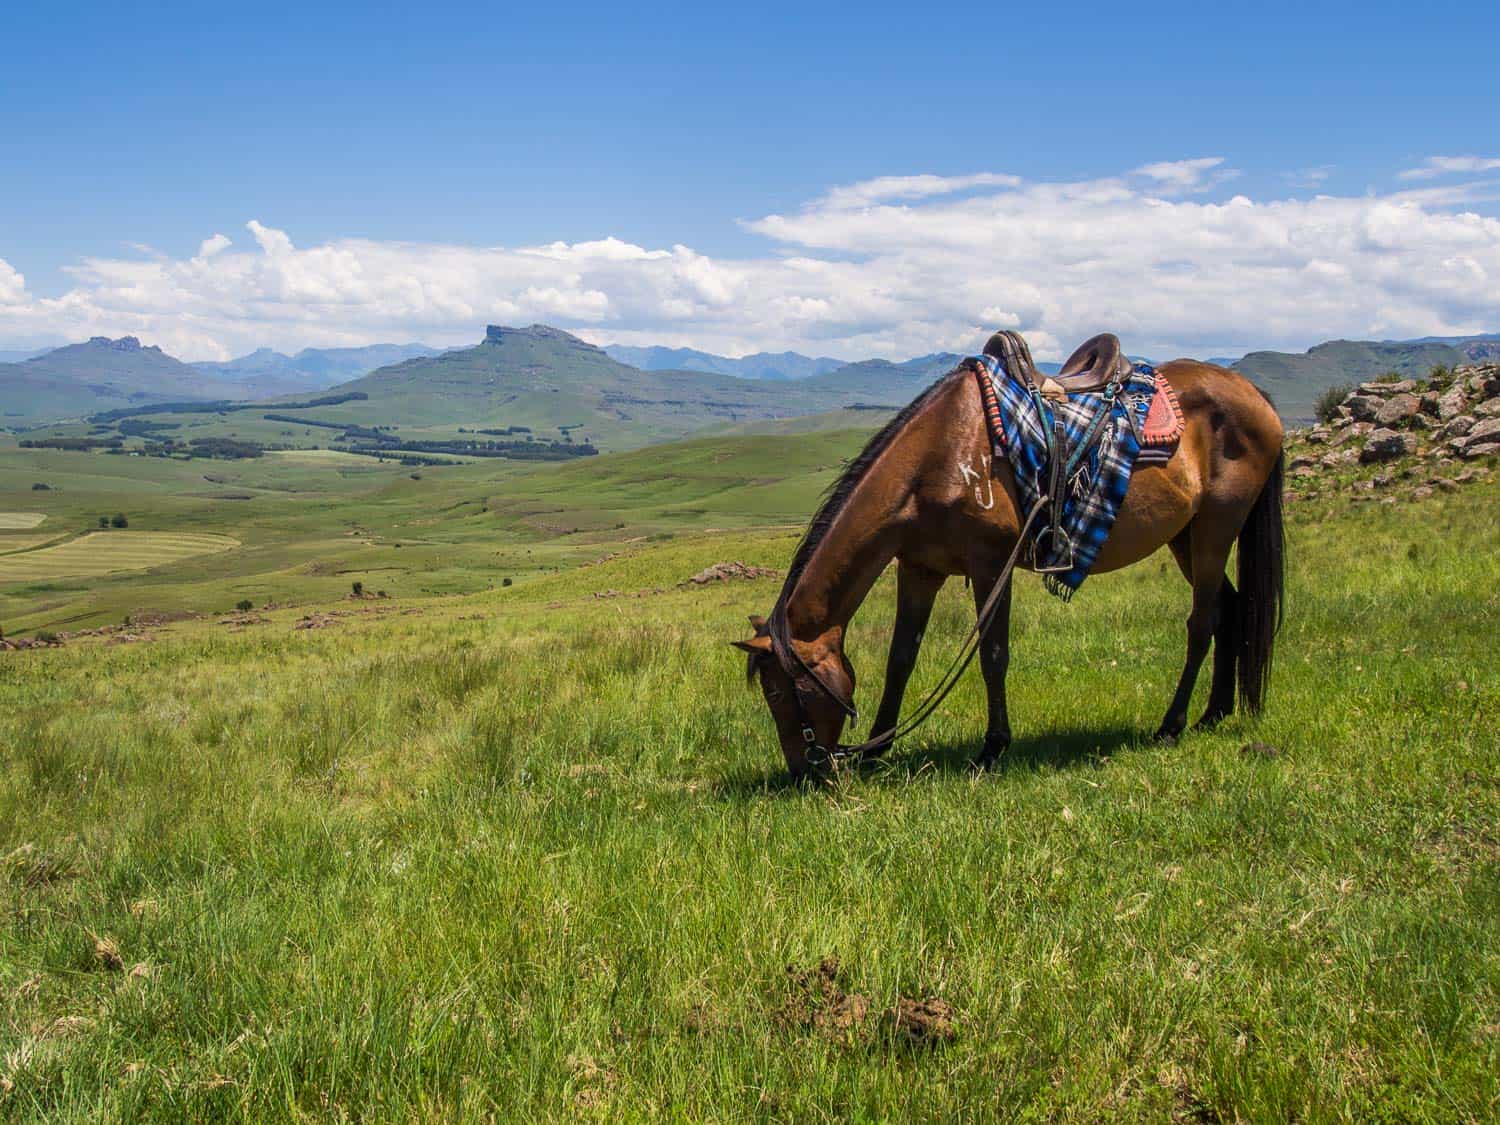 Taking a break on a horse riding trip in Underberg in the Drakensberg Mountains